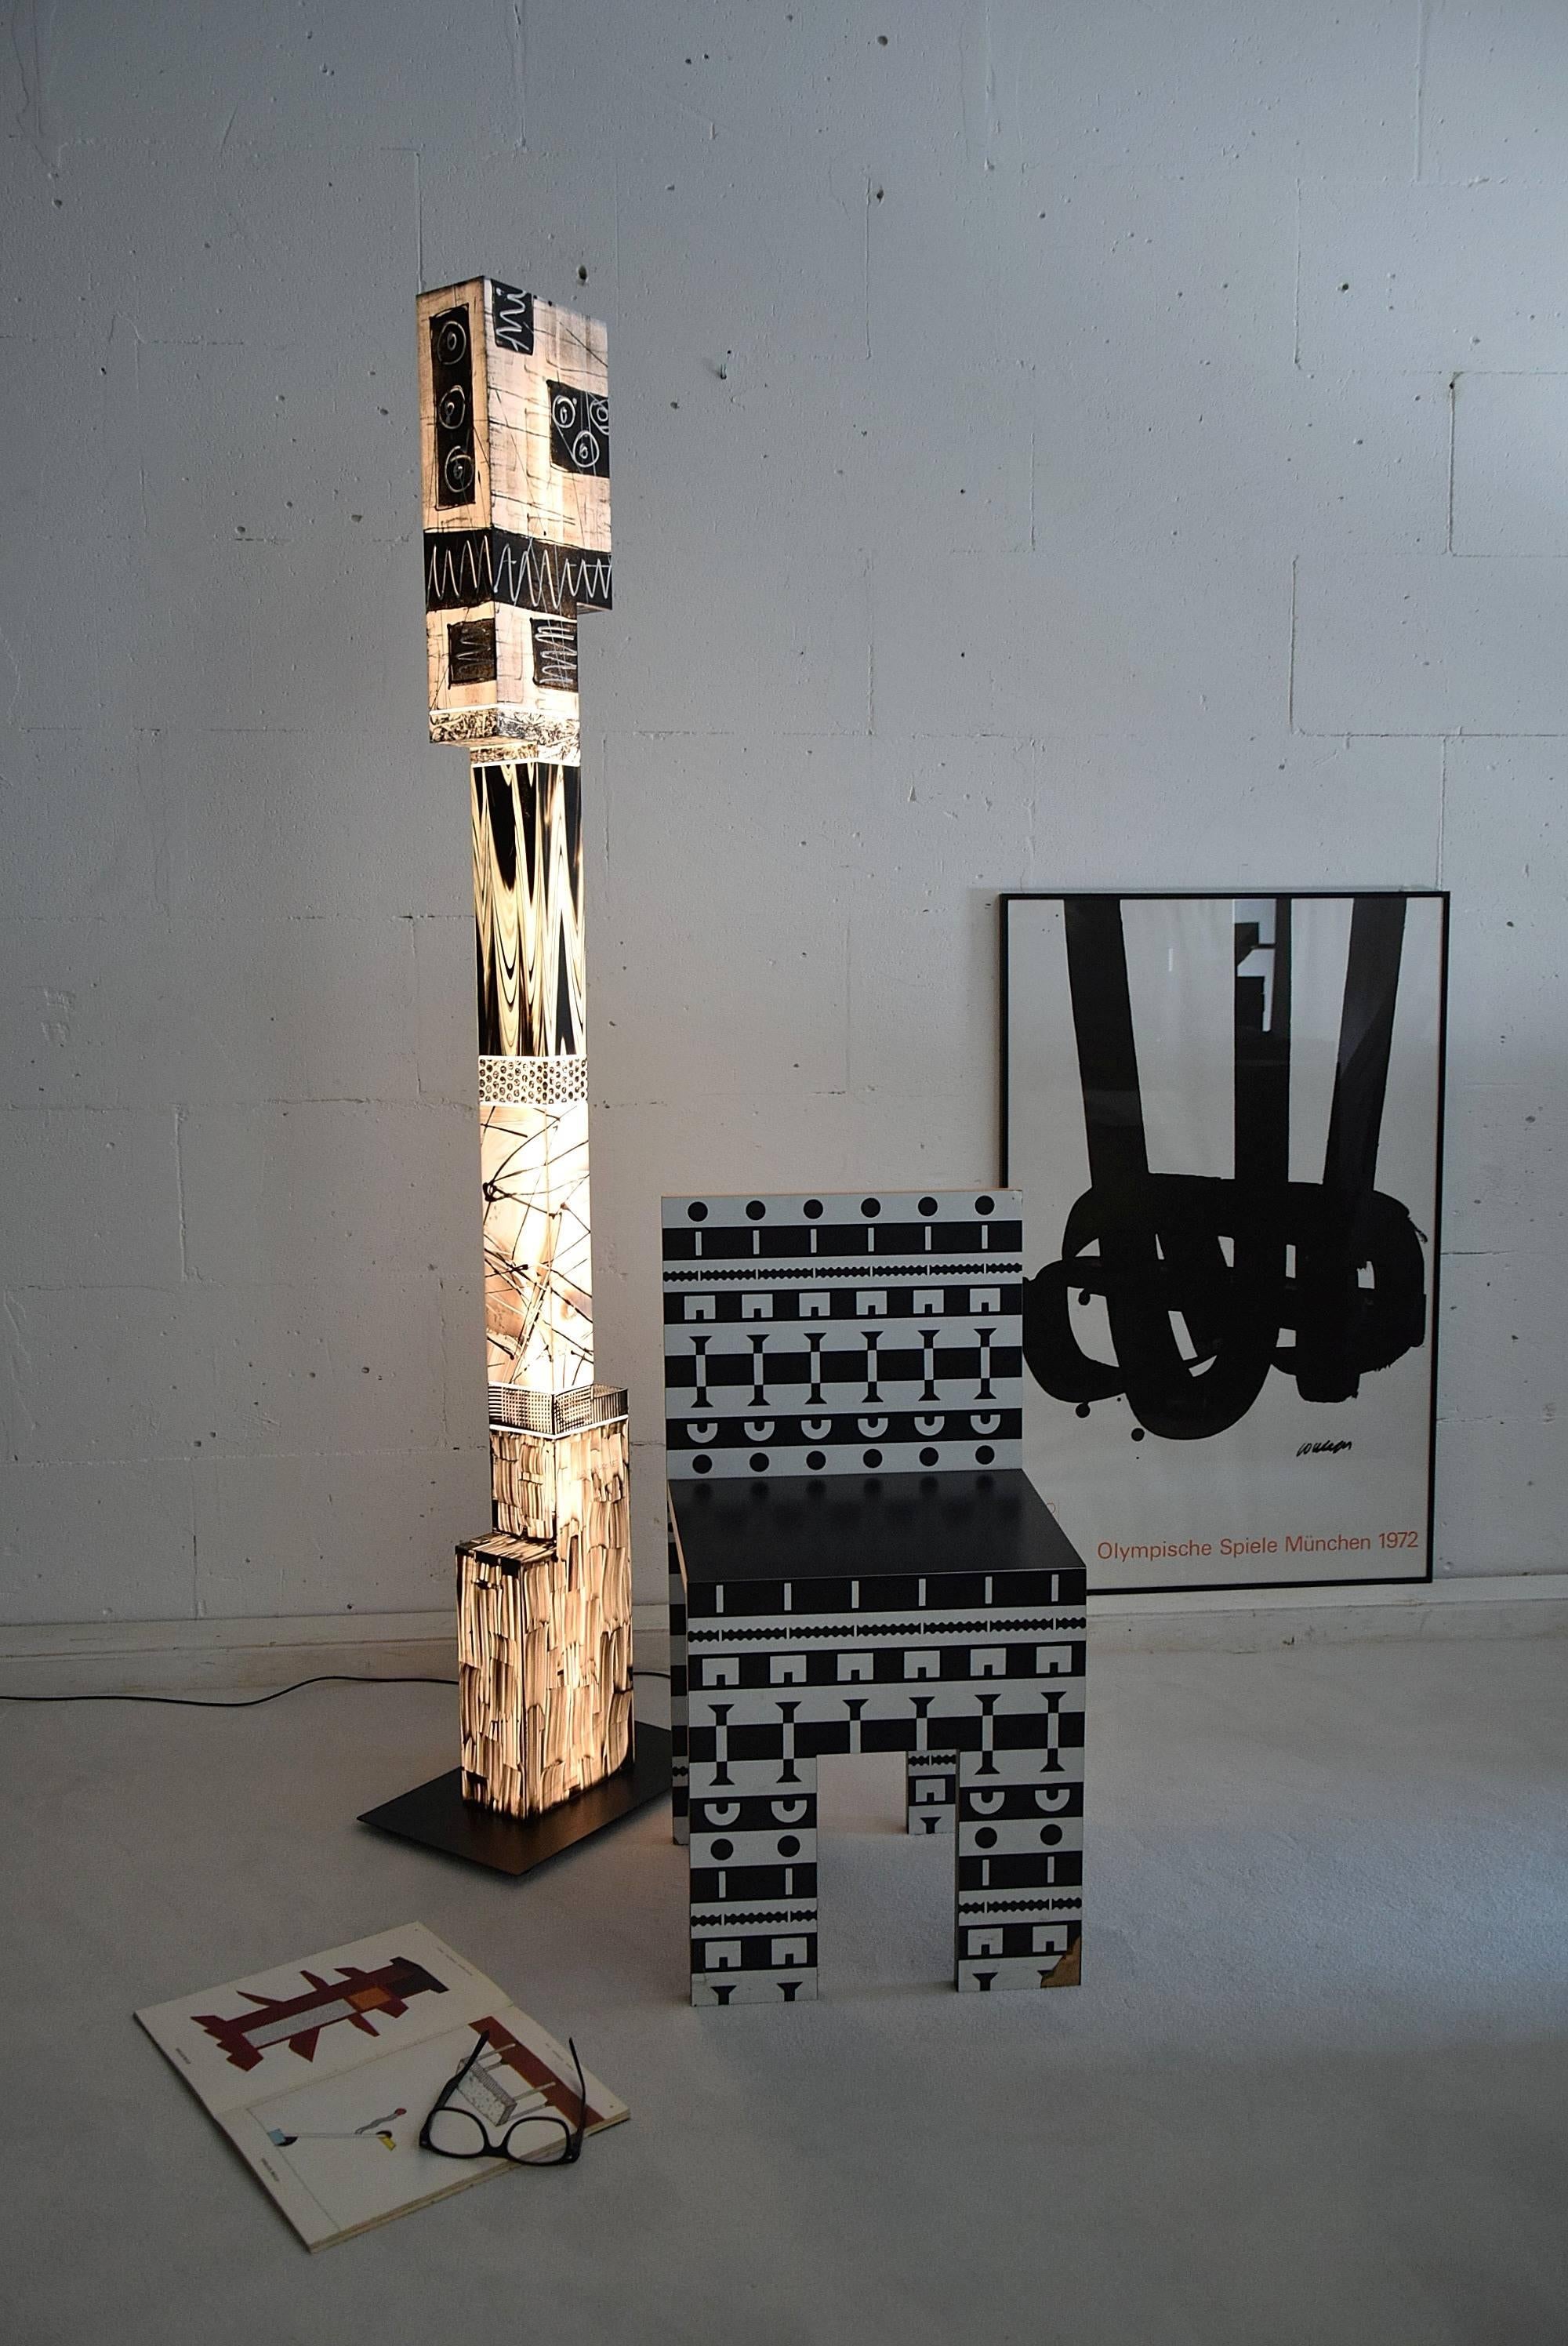 Mannahattan 24 pcs limited edition handmade and painted contemporary floor lamp made by Nando Marone in the Netherlands.

The entire lamp is made of hand cut and hand-painted opaal composites and a metal black painted base.

Measurements: H 68.90 x